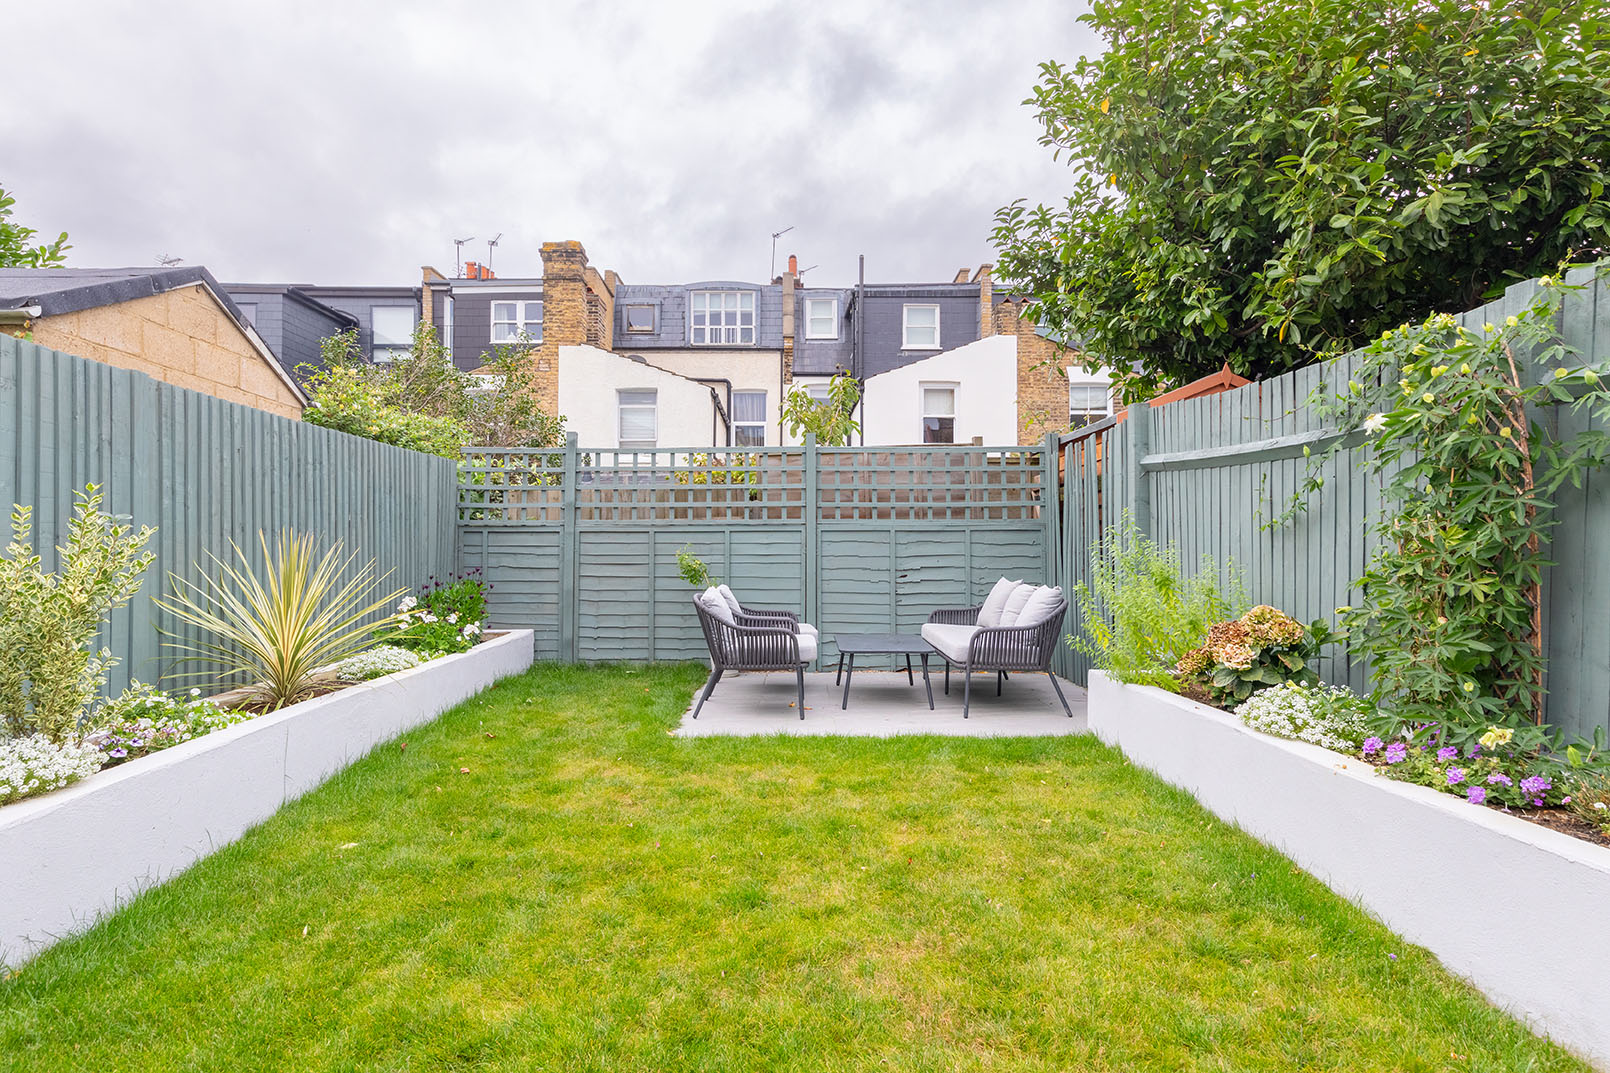 a large garden with a seating group at the end, captured for property photography.